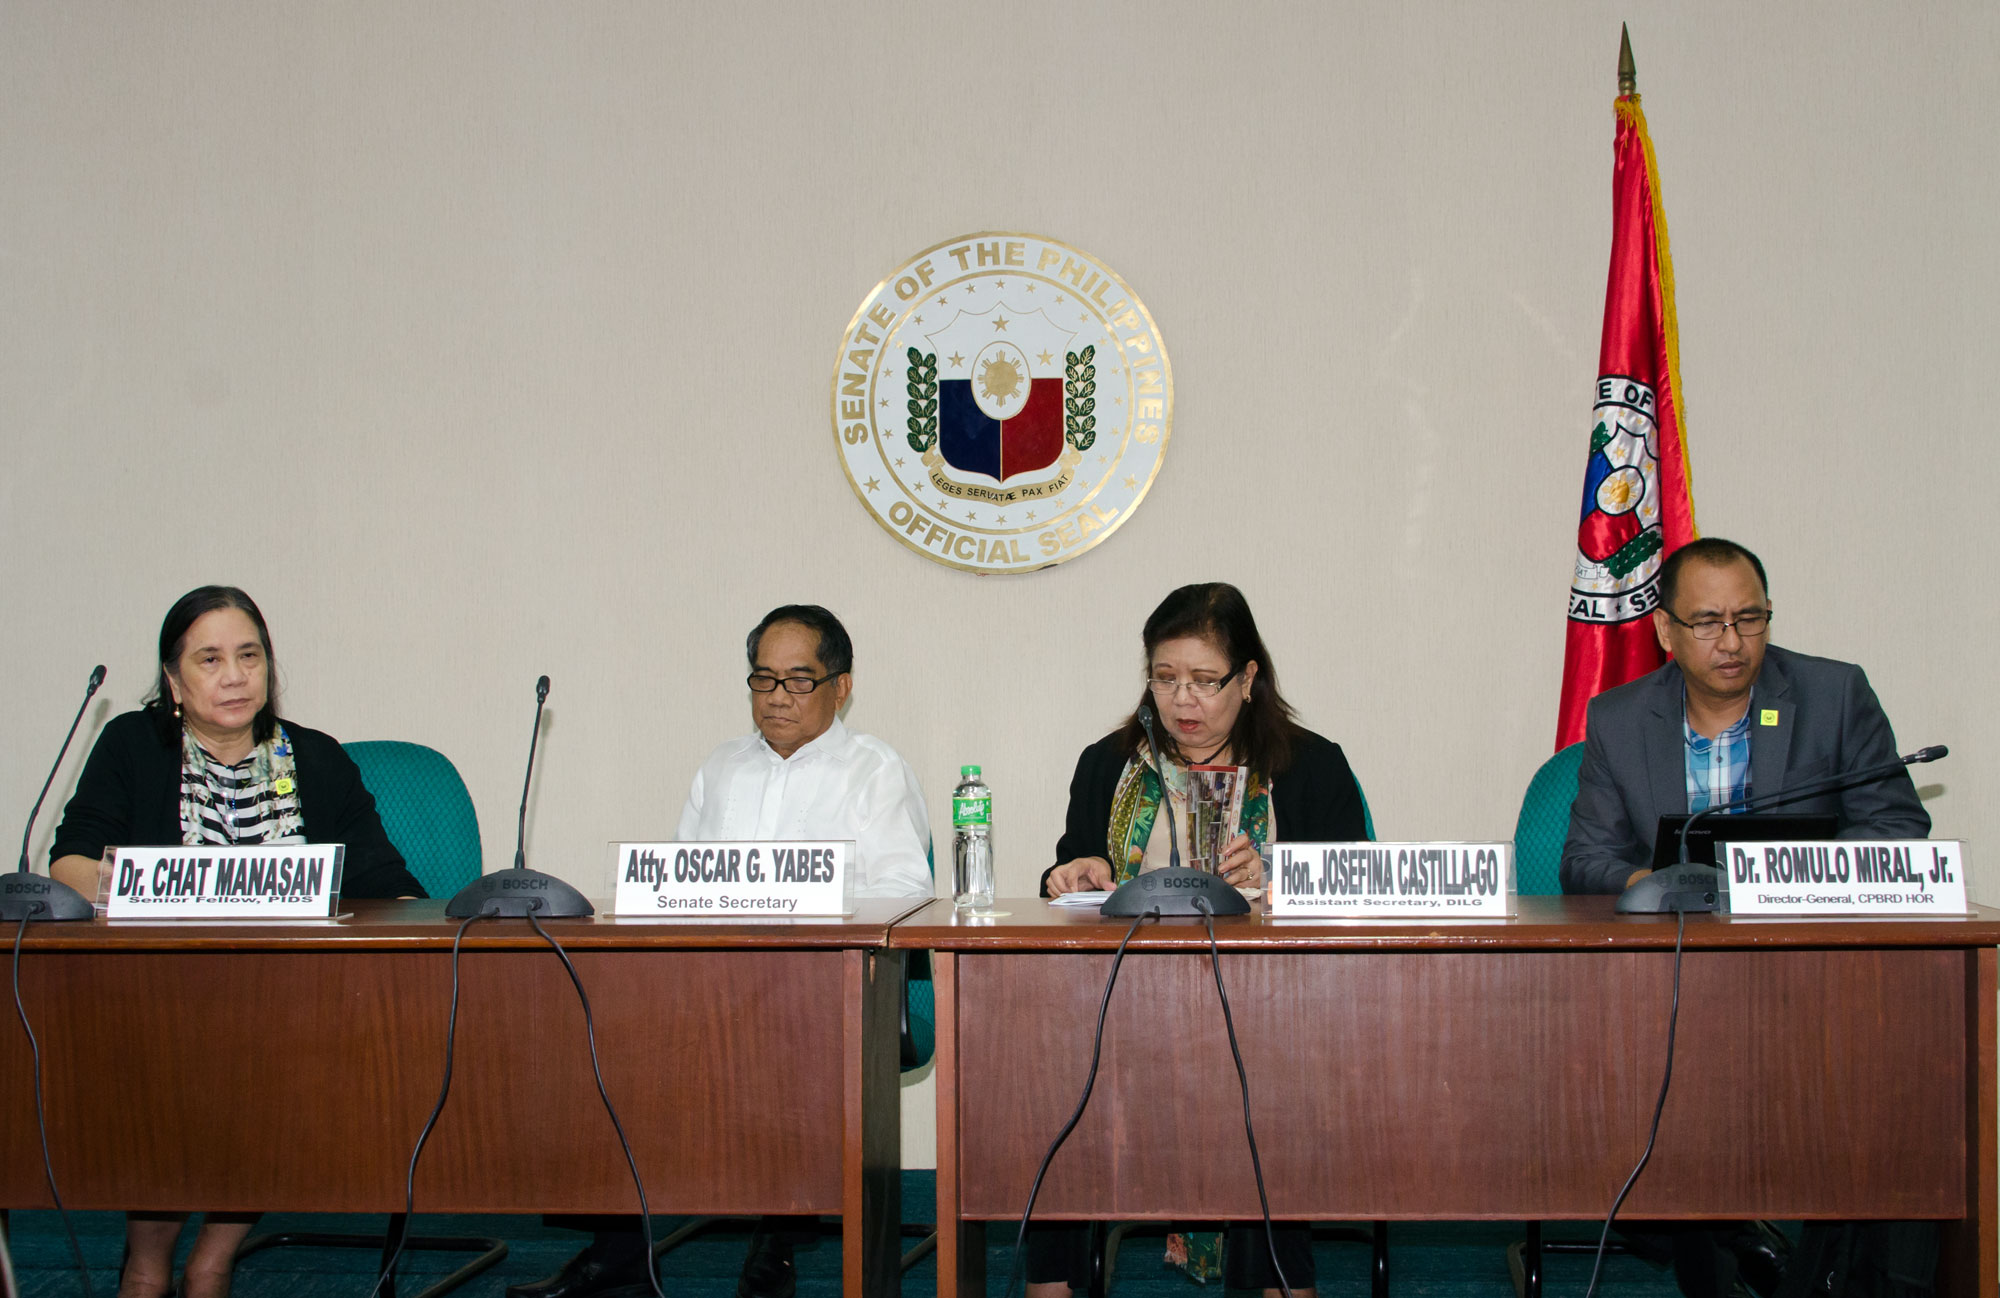 Senate Centennial Lecture Series Assessment Of The Bottom-Up Budgeting Process For FY 2015-GGM_7845.jpg